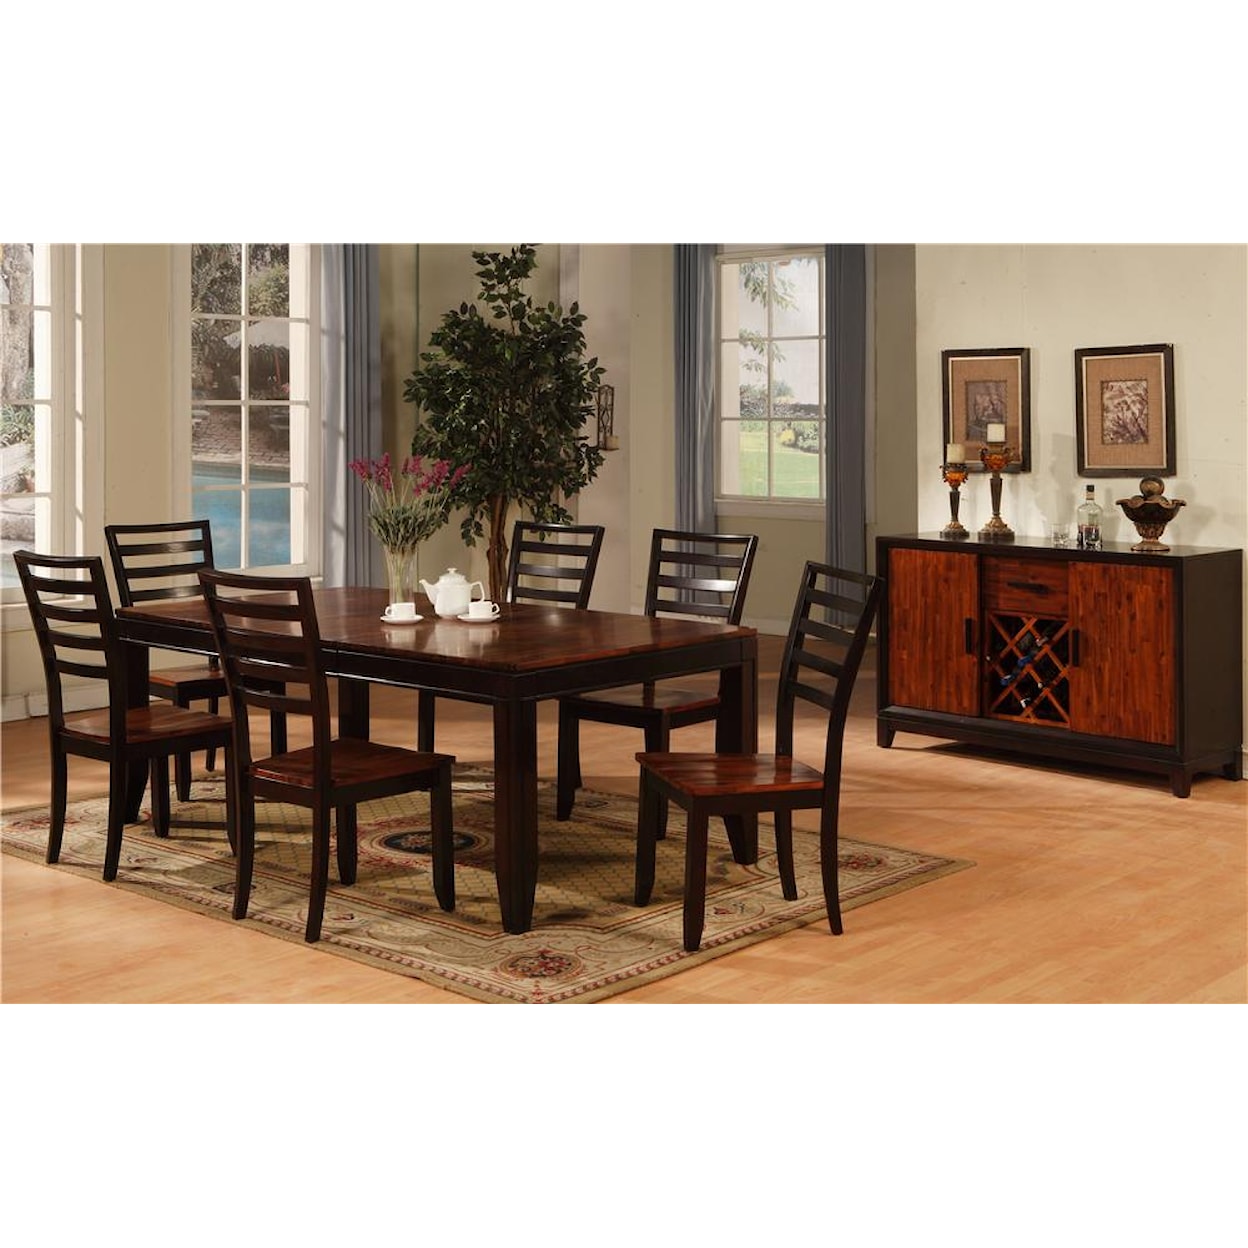 Holland House Adaptable Dining 7 Piece Dining Set